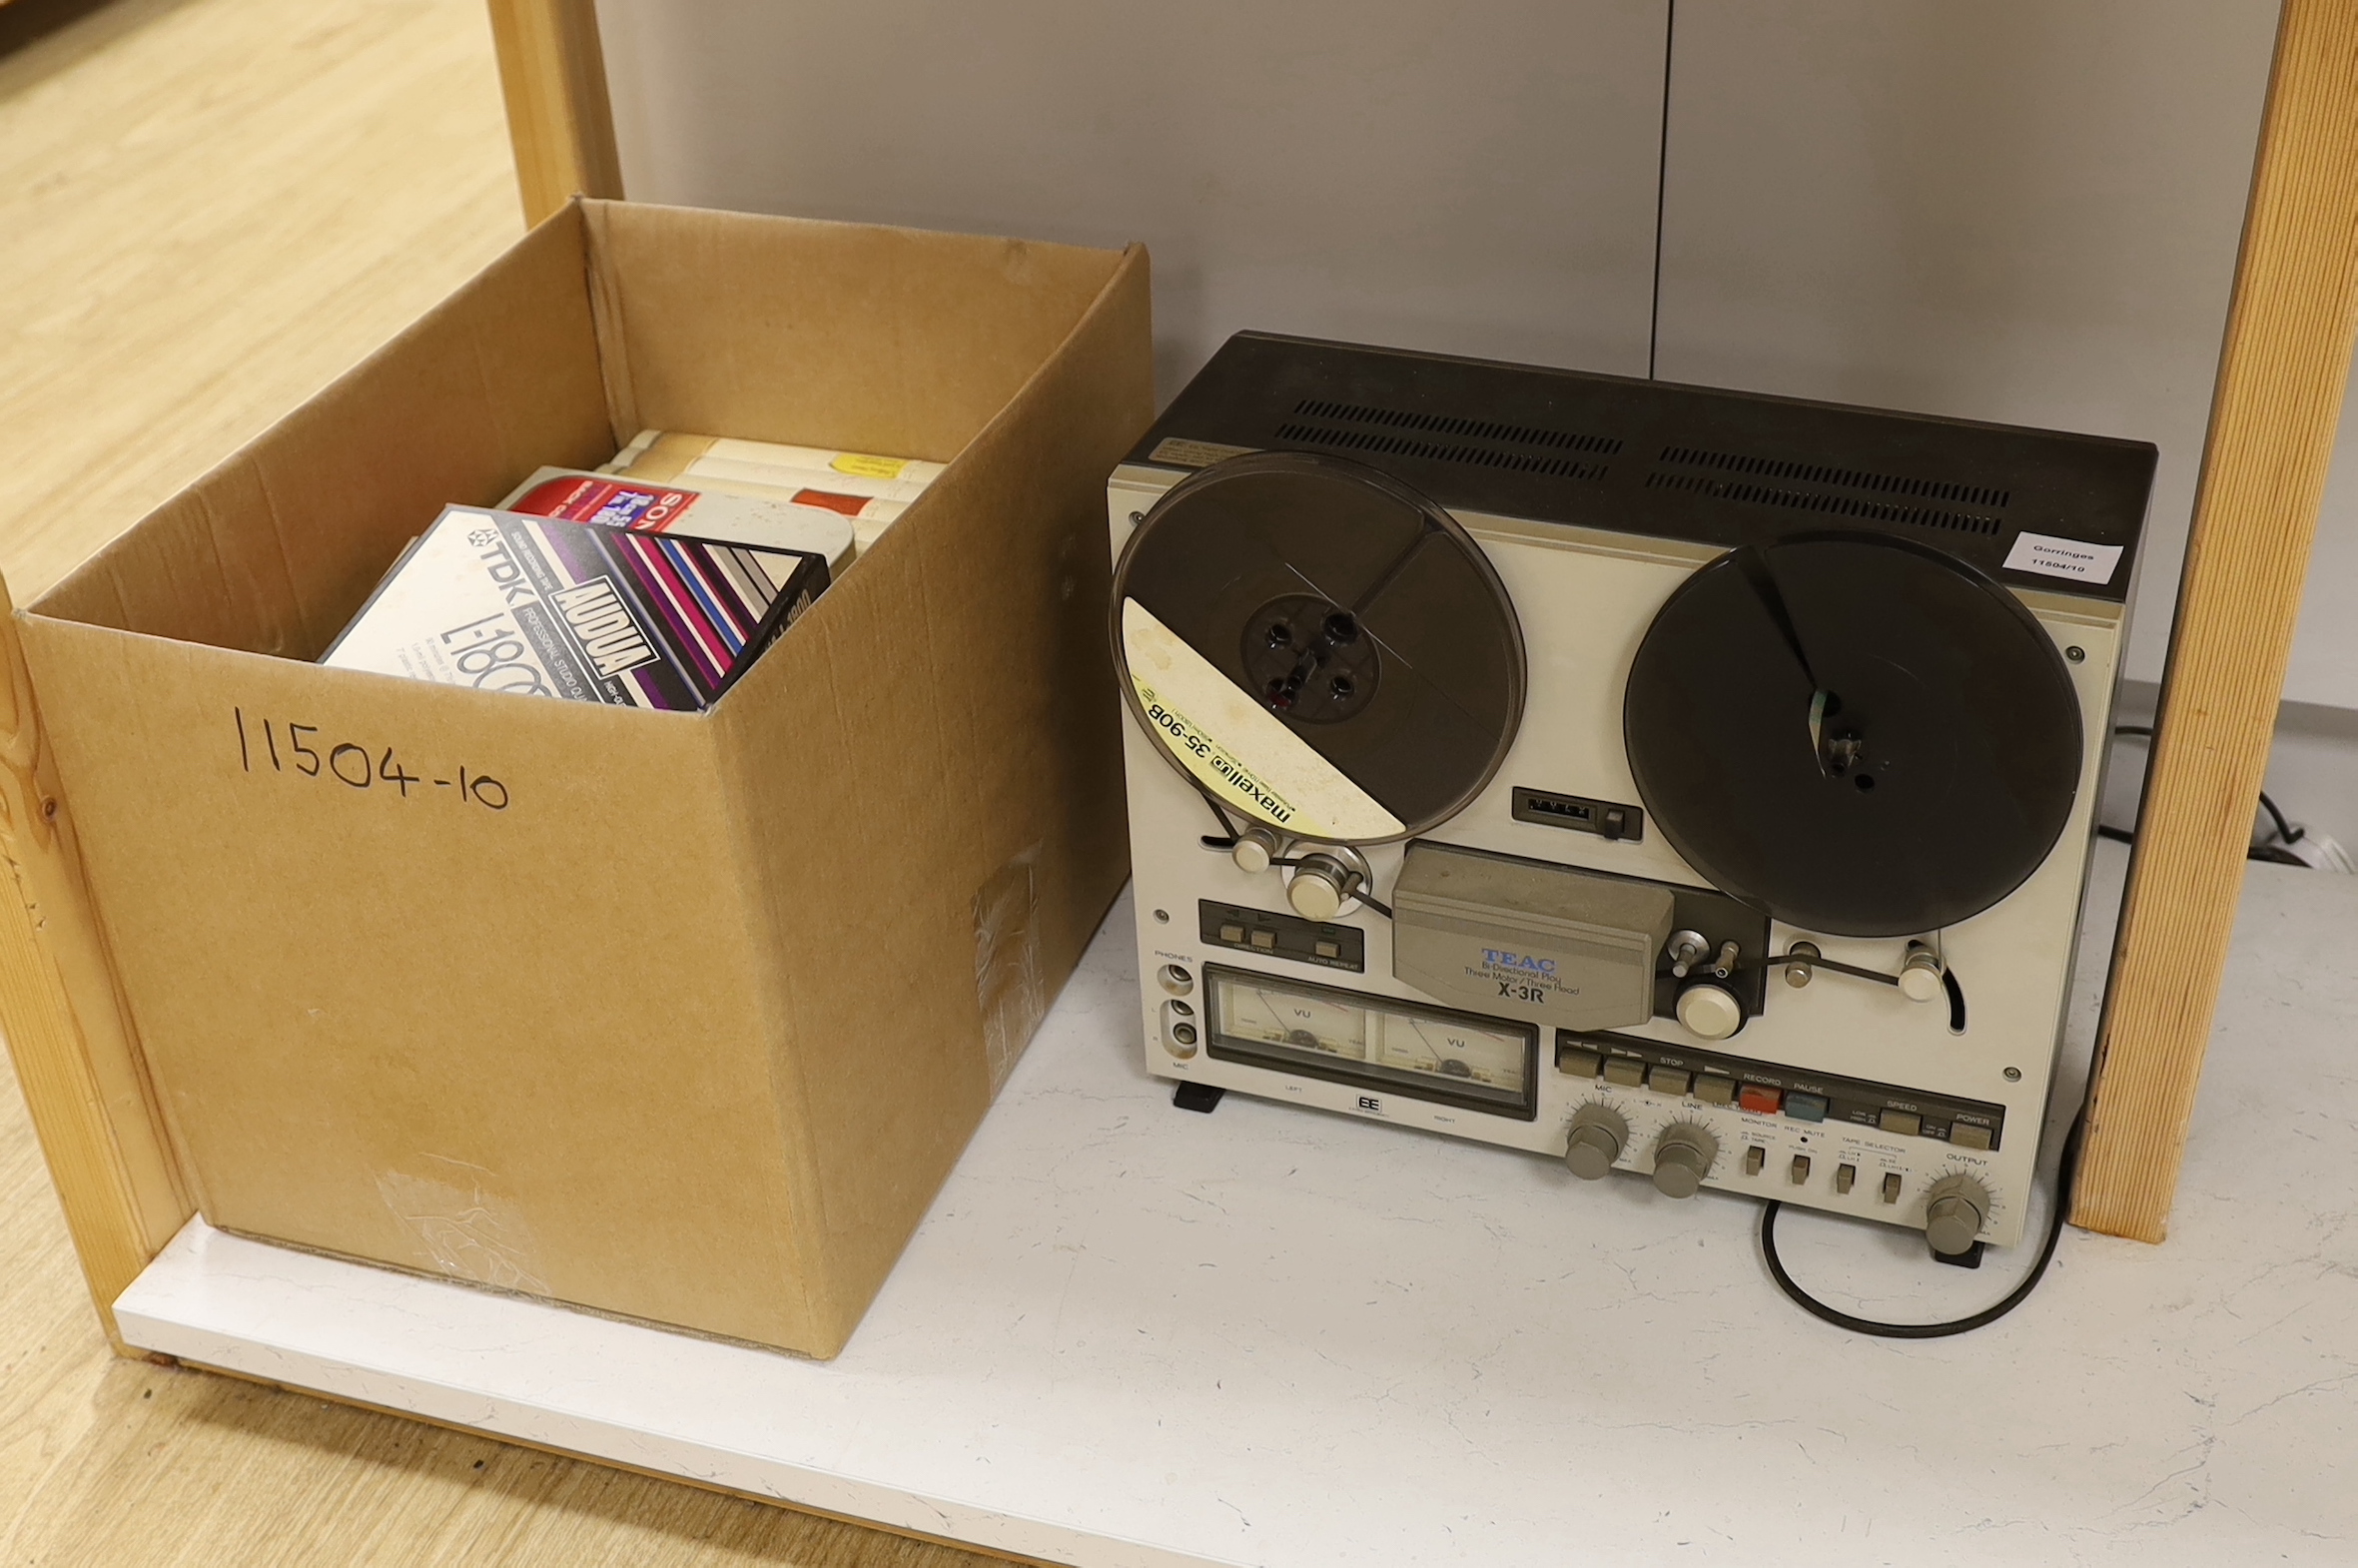 A TEAC X-3R reel to reel player, together with a collection of cased reels